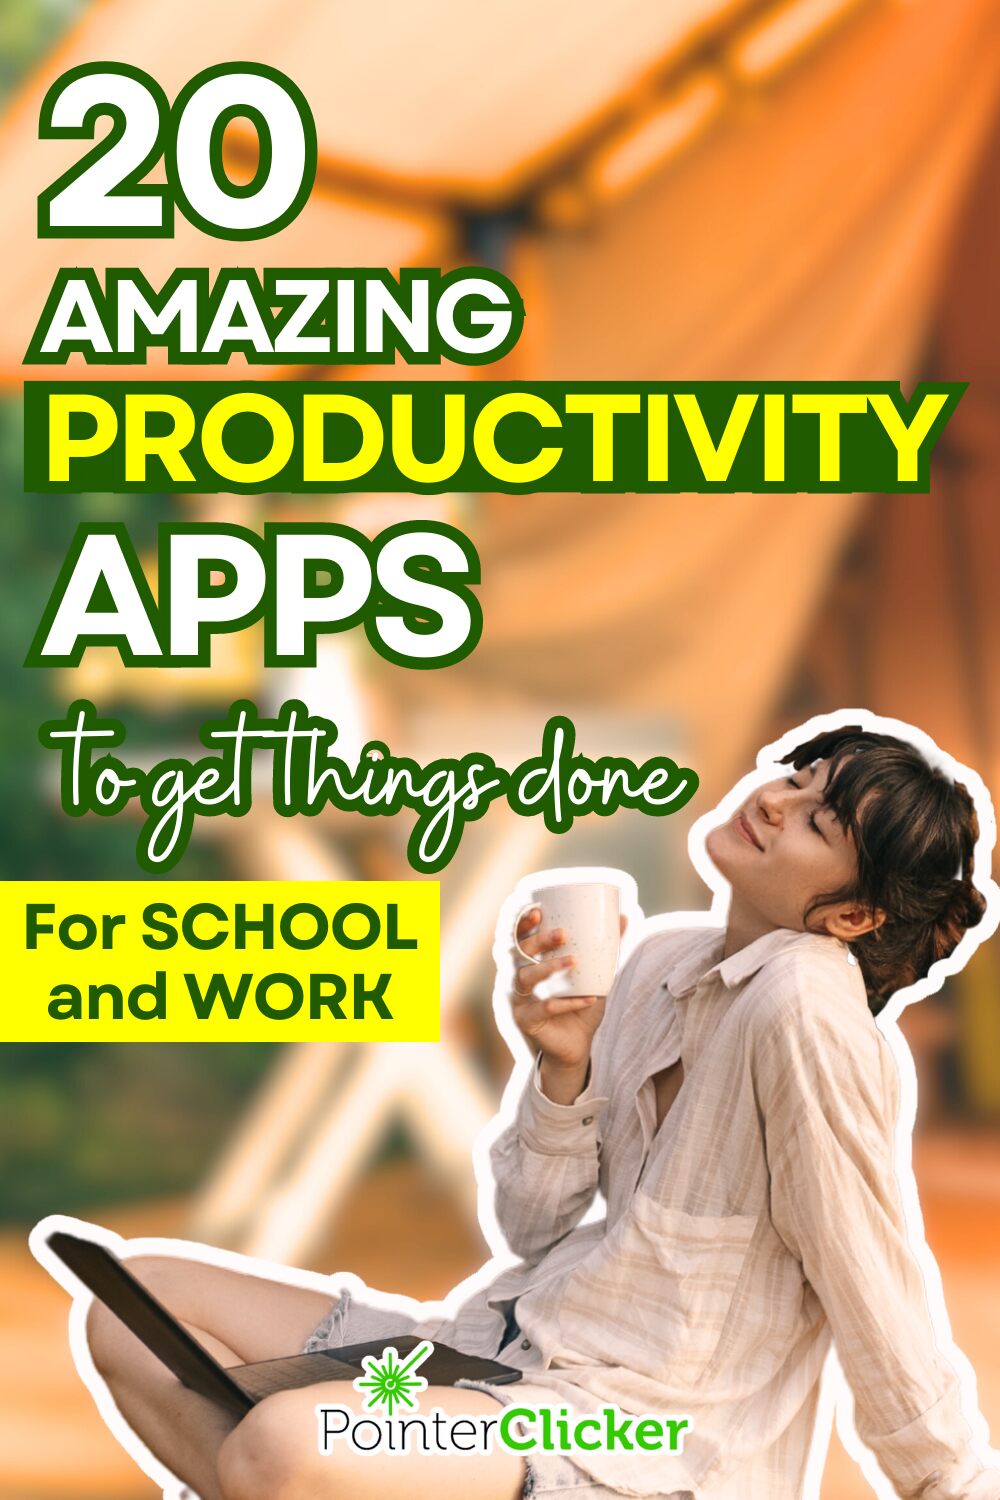 image with a girl with a laptop on her lap and a cup on her hand, the words say '20 amazing productivity apps to get things done for school and work'